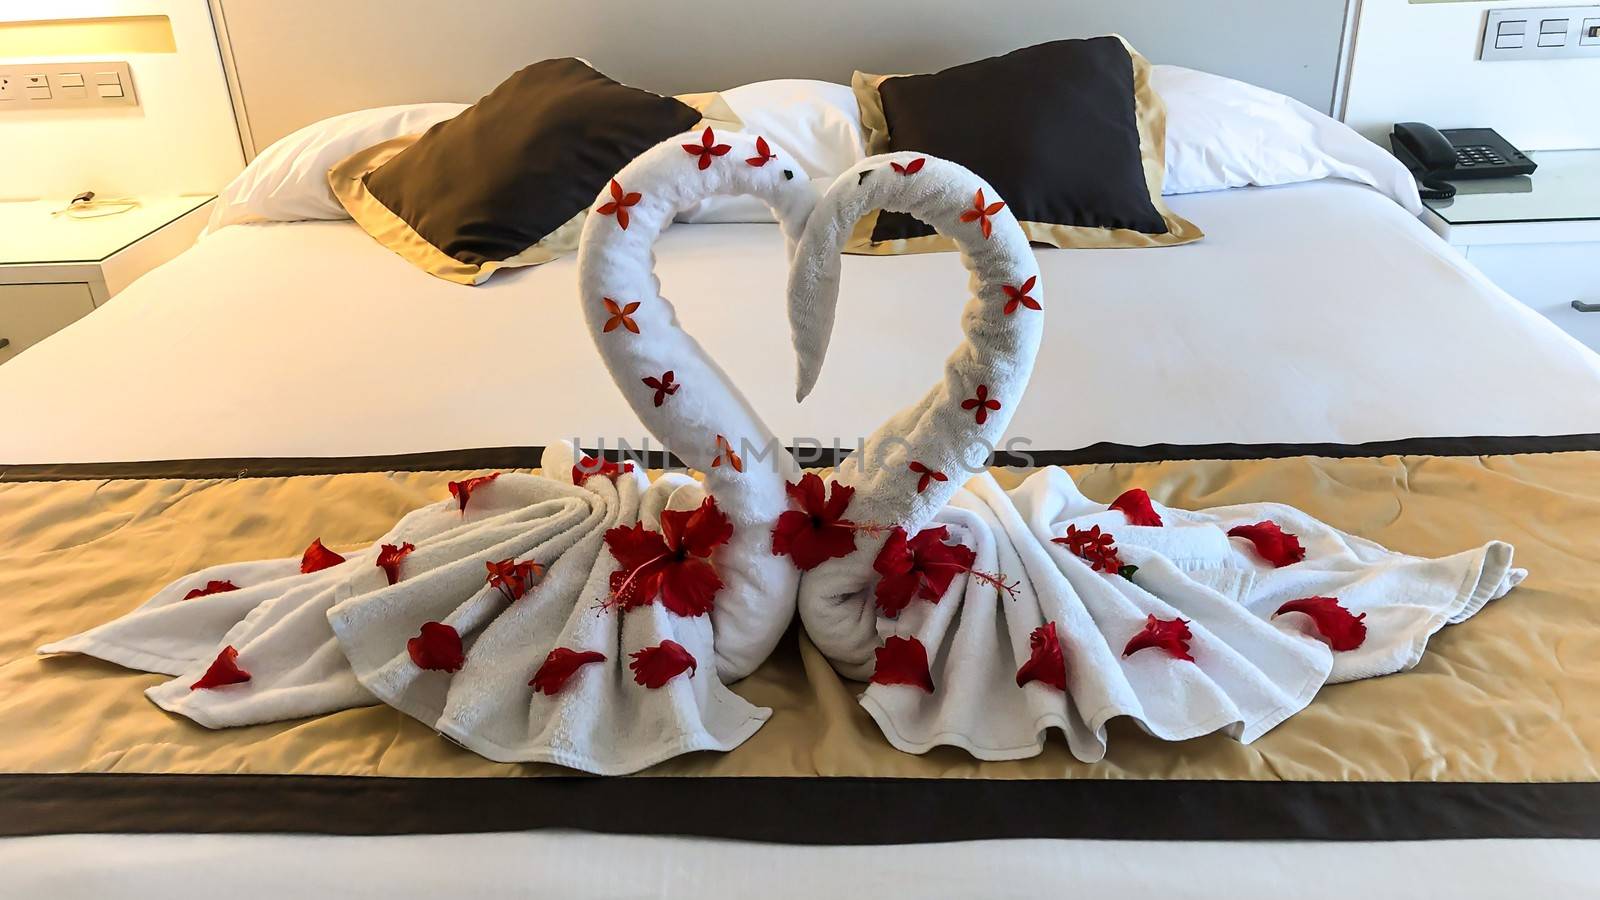 Two nice towel swans on a hotel's bed by AlonaGryadovaya